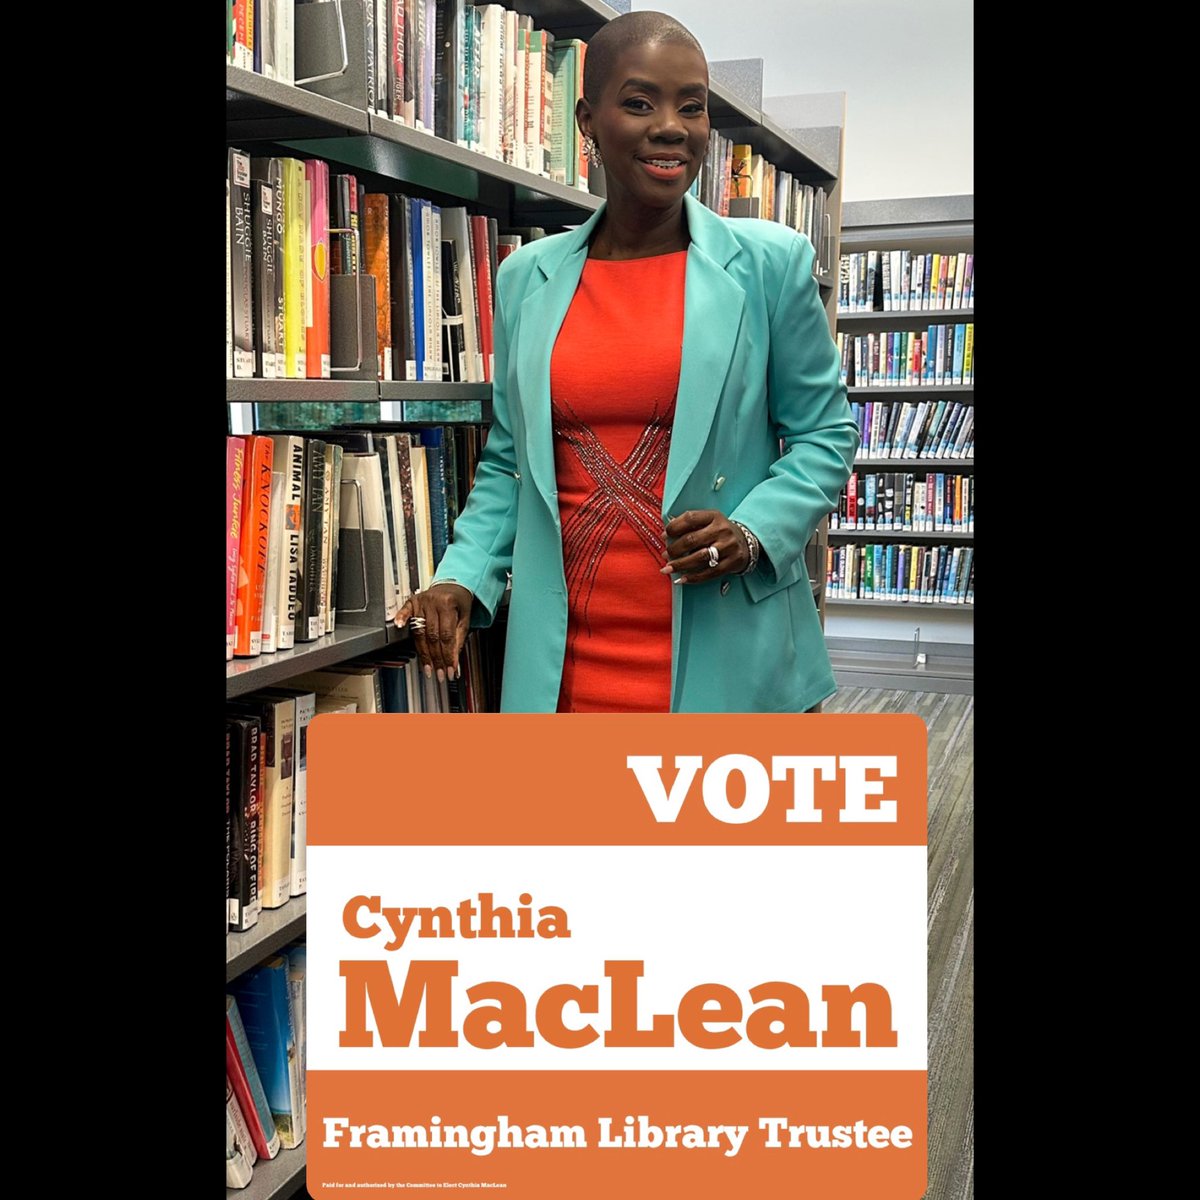 TUESDAY IS ELECTION DAY here in Framingham 🗳️

Hello neighbors, I would be honored if you would cast one of your votes on Tuesday November 7, to elect me to the Framingham Library Board of Trustees. 

ElectCynthiaMacLean.com 

#FraminghamMa #framingham
#CityofFramingham